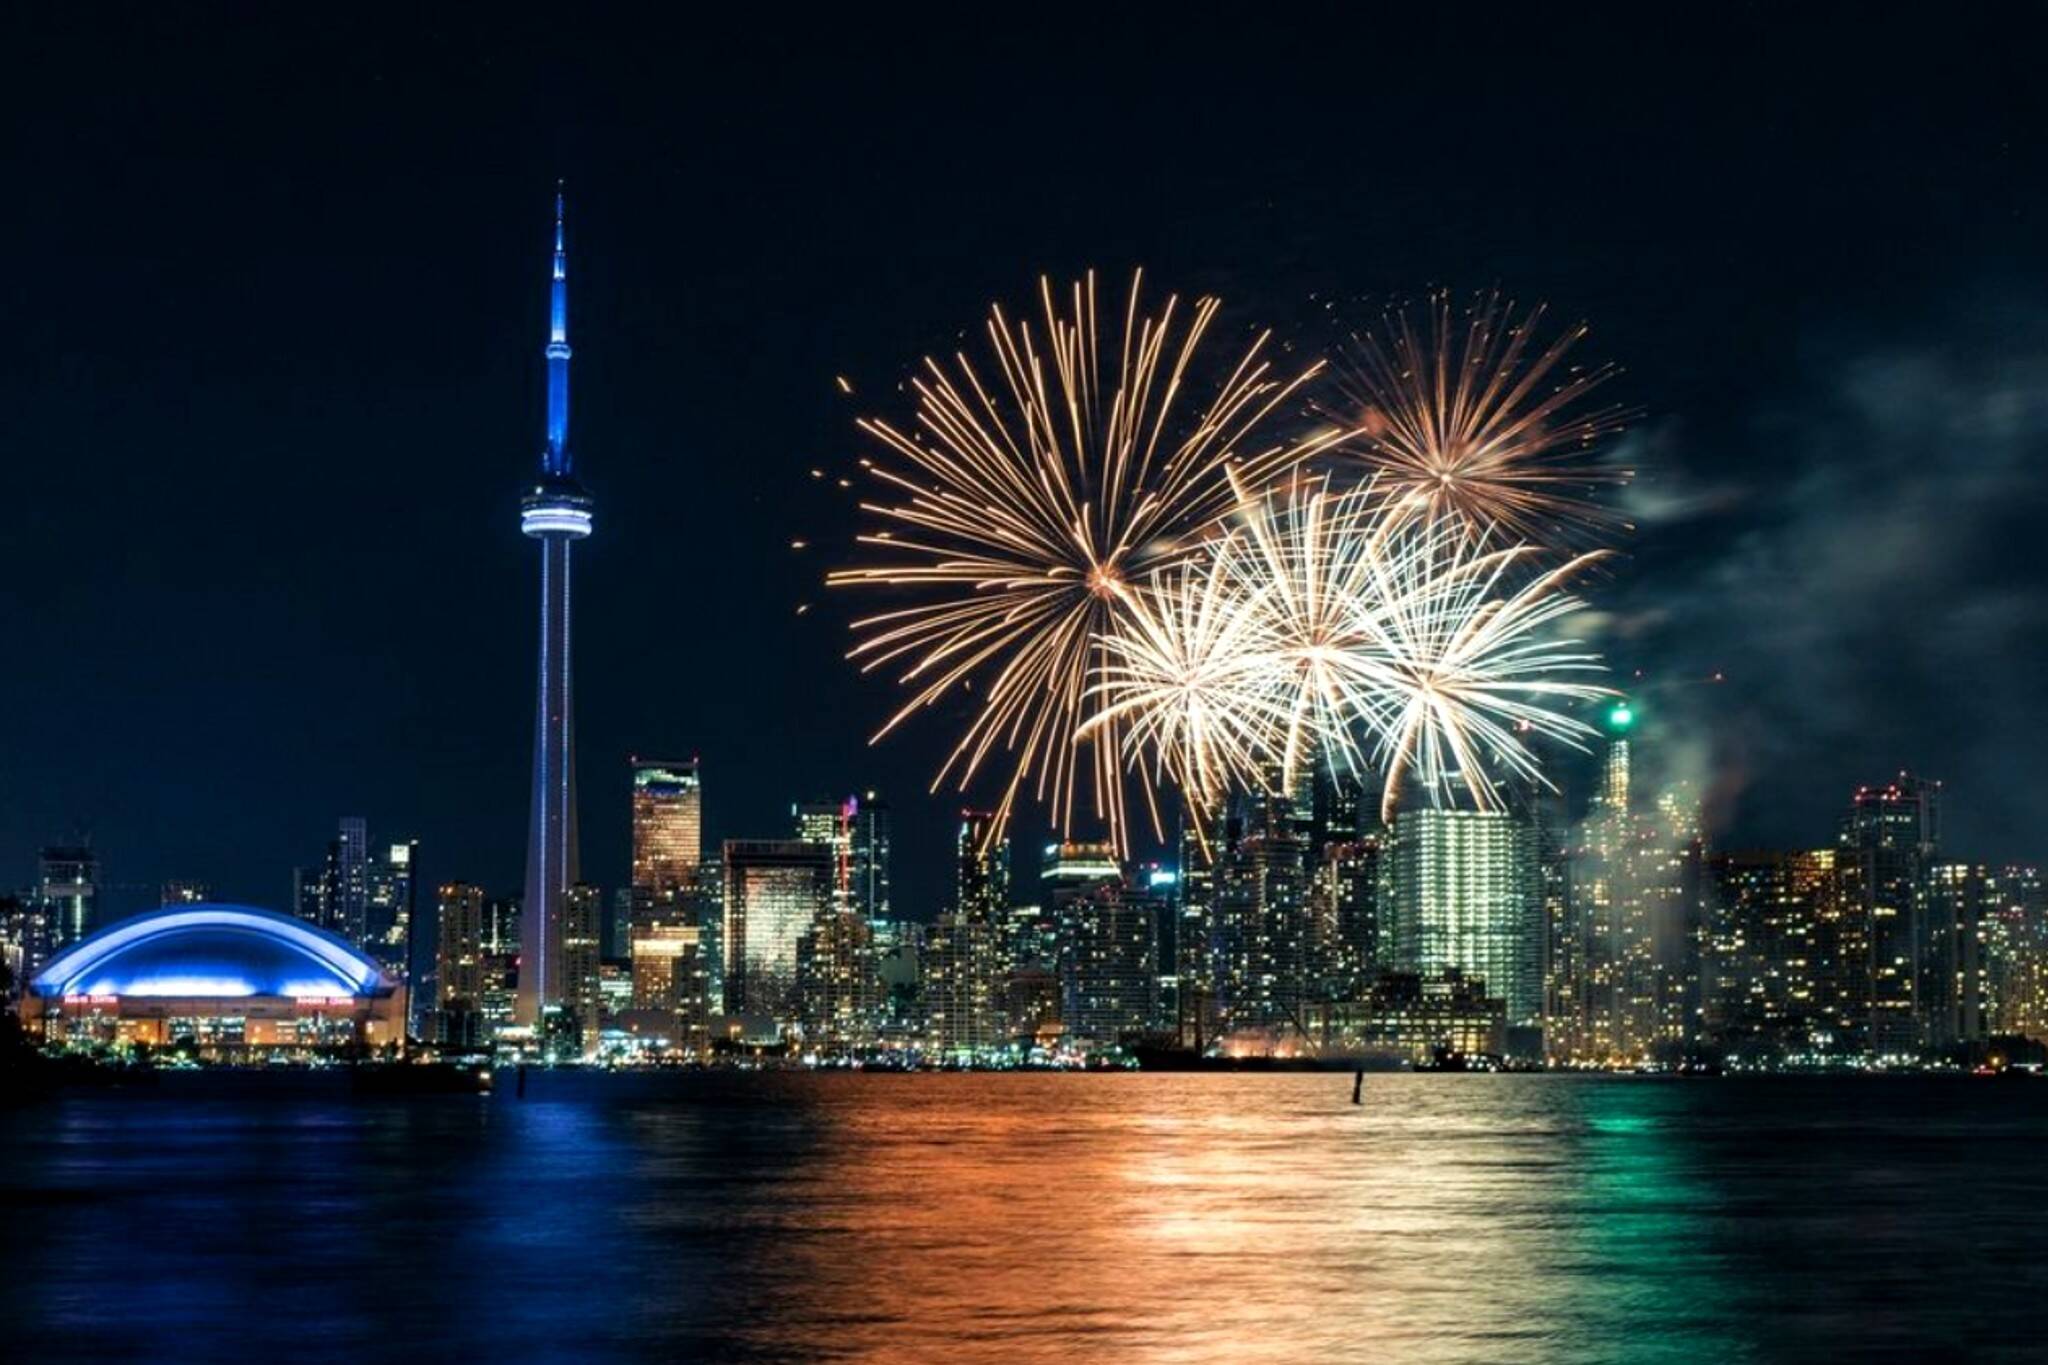 20231207 New Year Fireworks Toronto ?w=2048&cmd=resize Then Crop&height=1365&quality=70